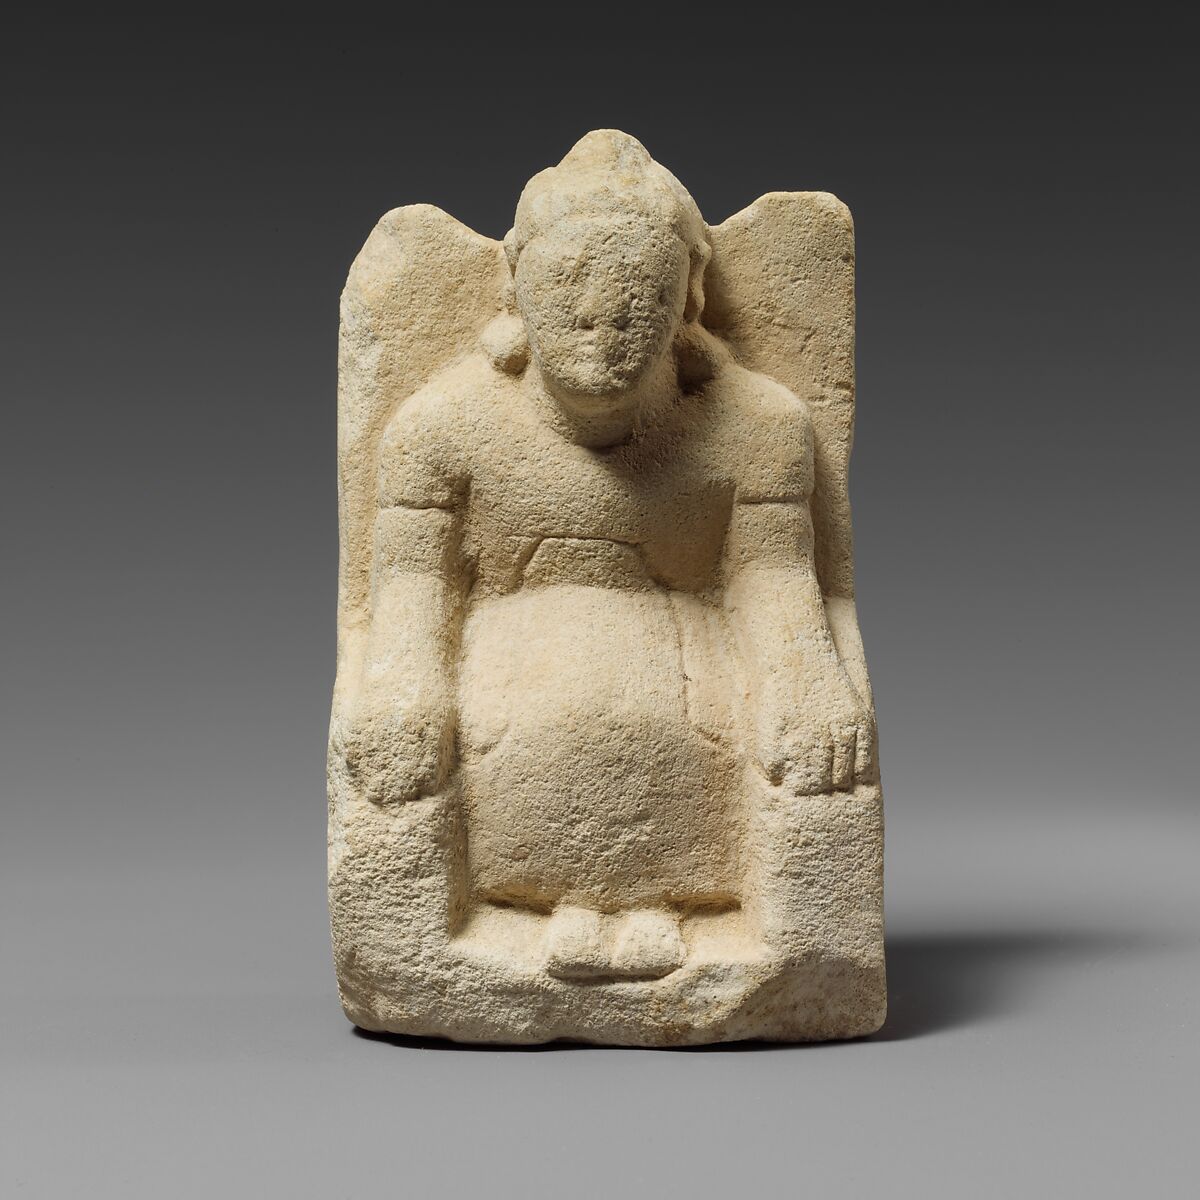 Limestone statuette of a seated beardless male votary with a helmet, Limestone, Cypriot 